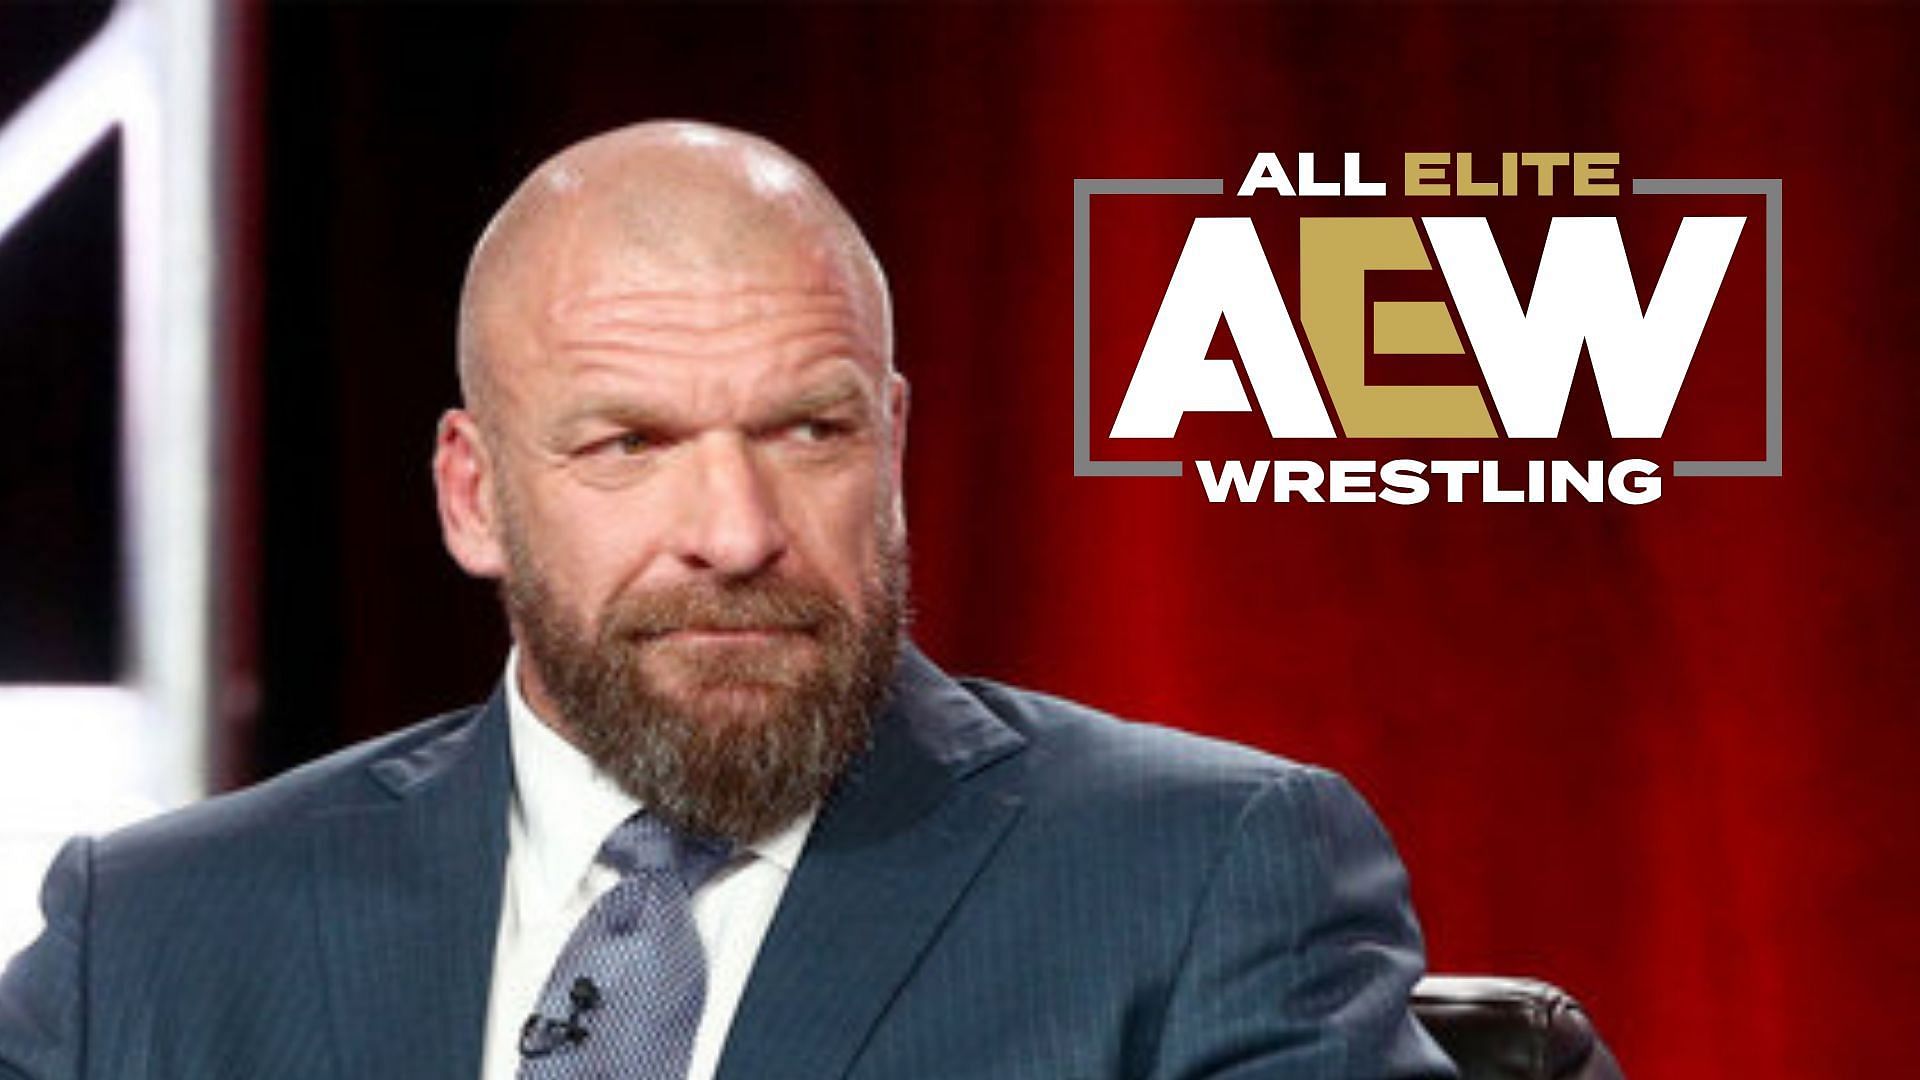 Which AEW stars does Triple H have his eye on now?